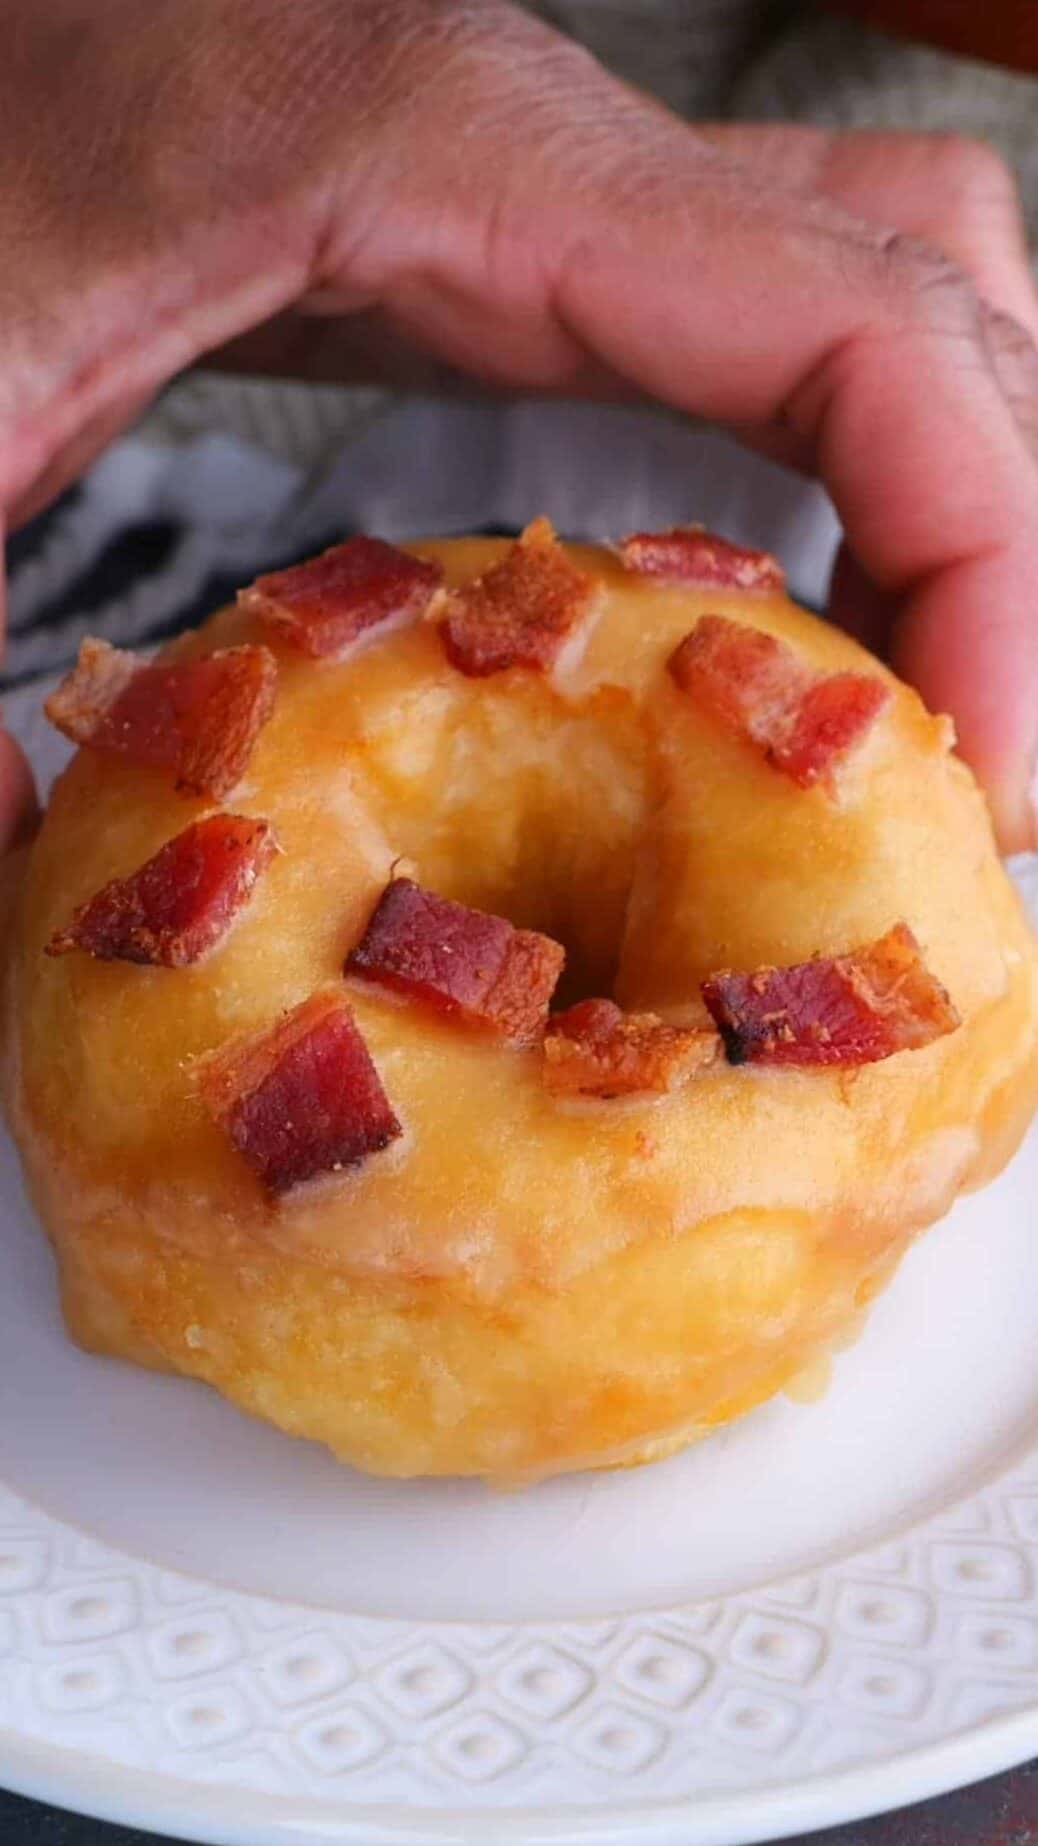 A maple donut topped with crisp bacon pieces being placed on a white plate